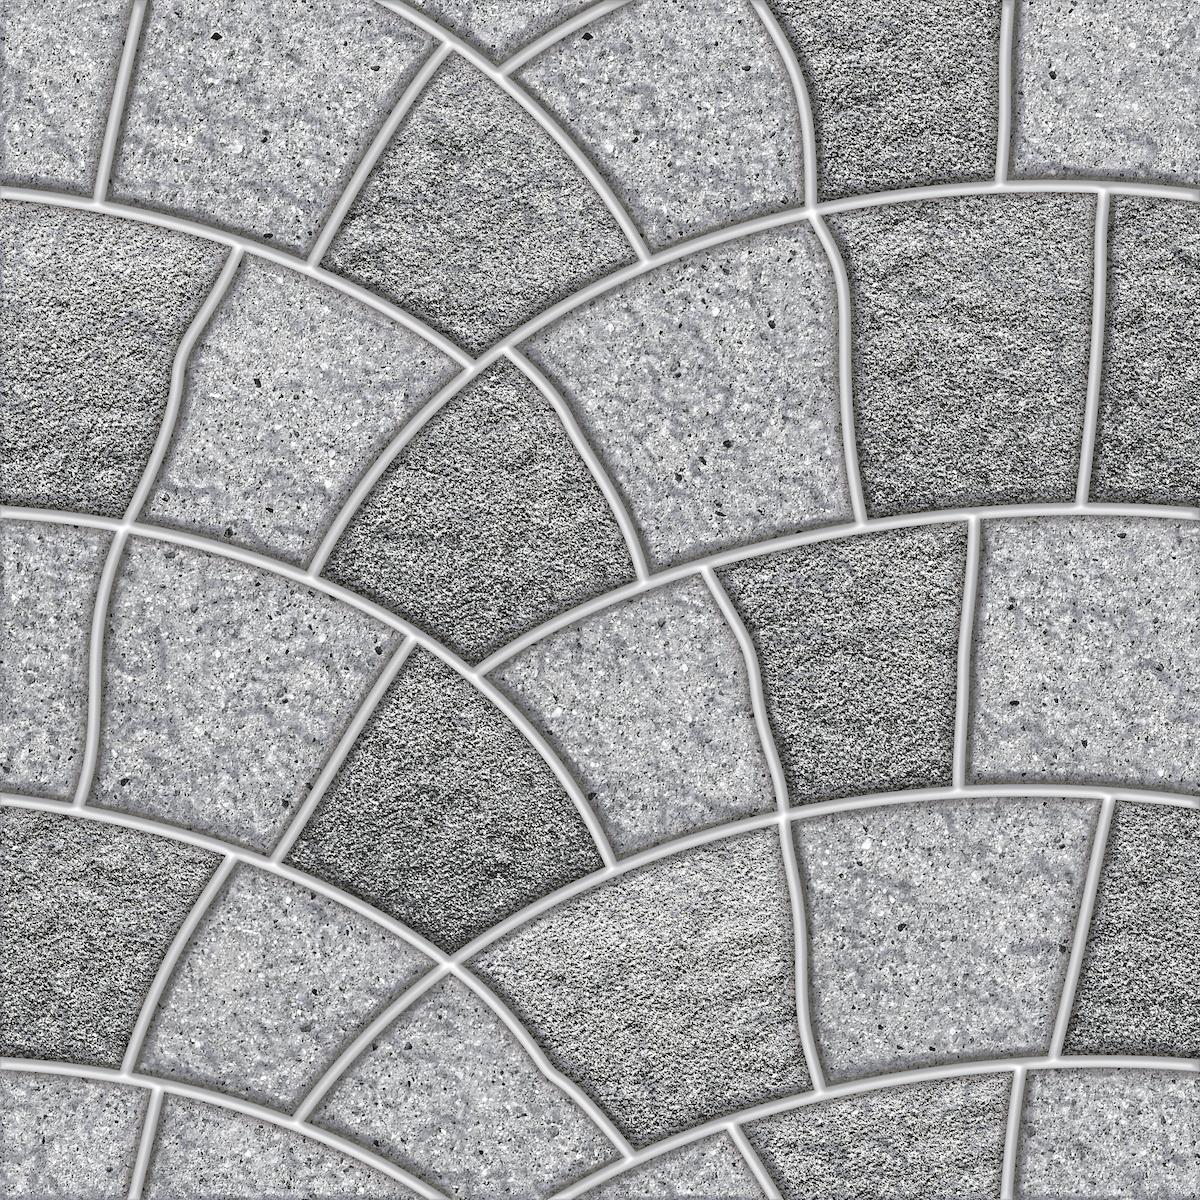 Grey Tiles for Balcony Tiles, Swimming Pool Tiles, Parking Tiles, Pathway Tiles, Commercial/Office, Outdoor Area